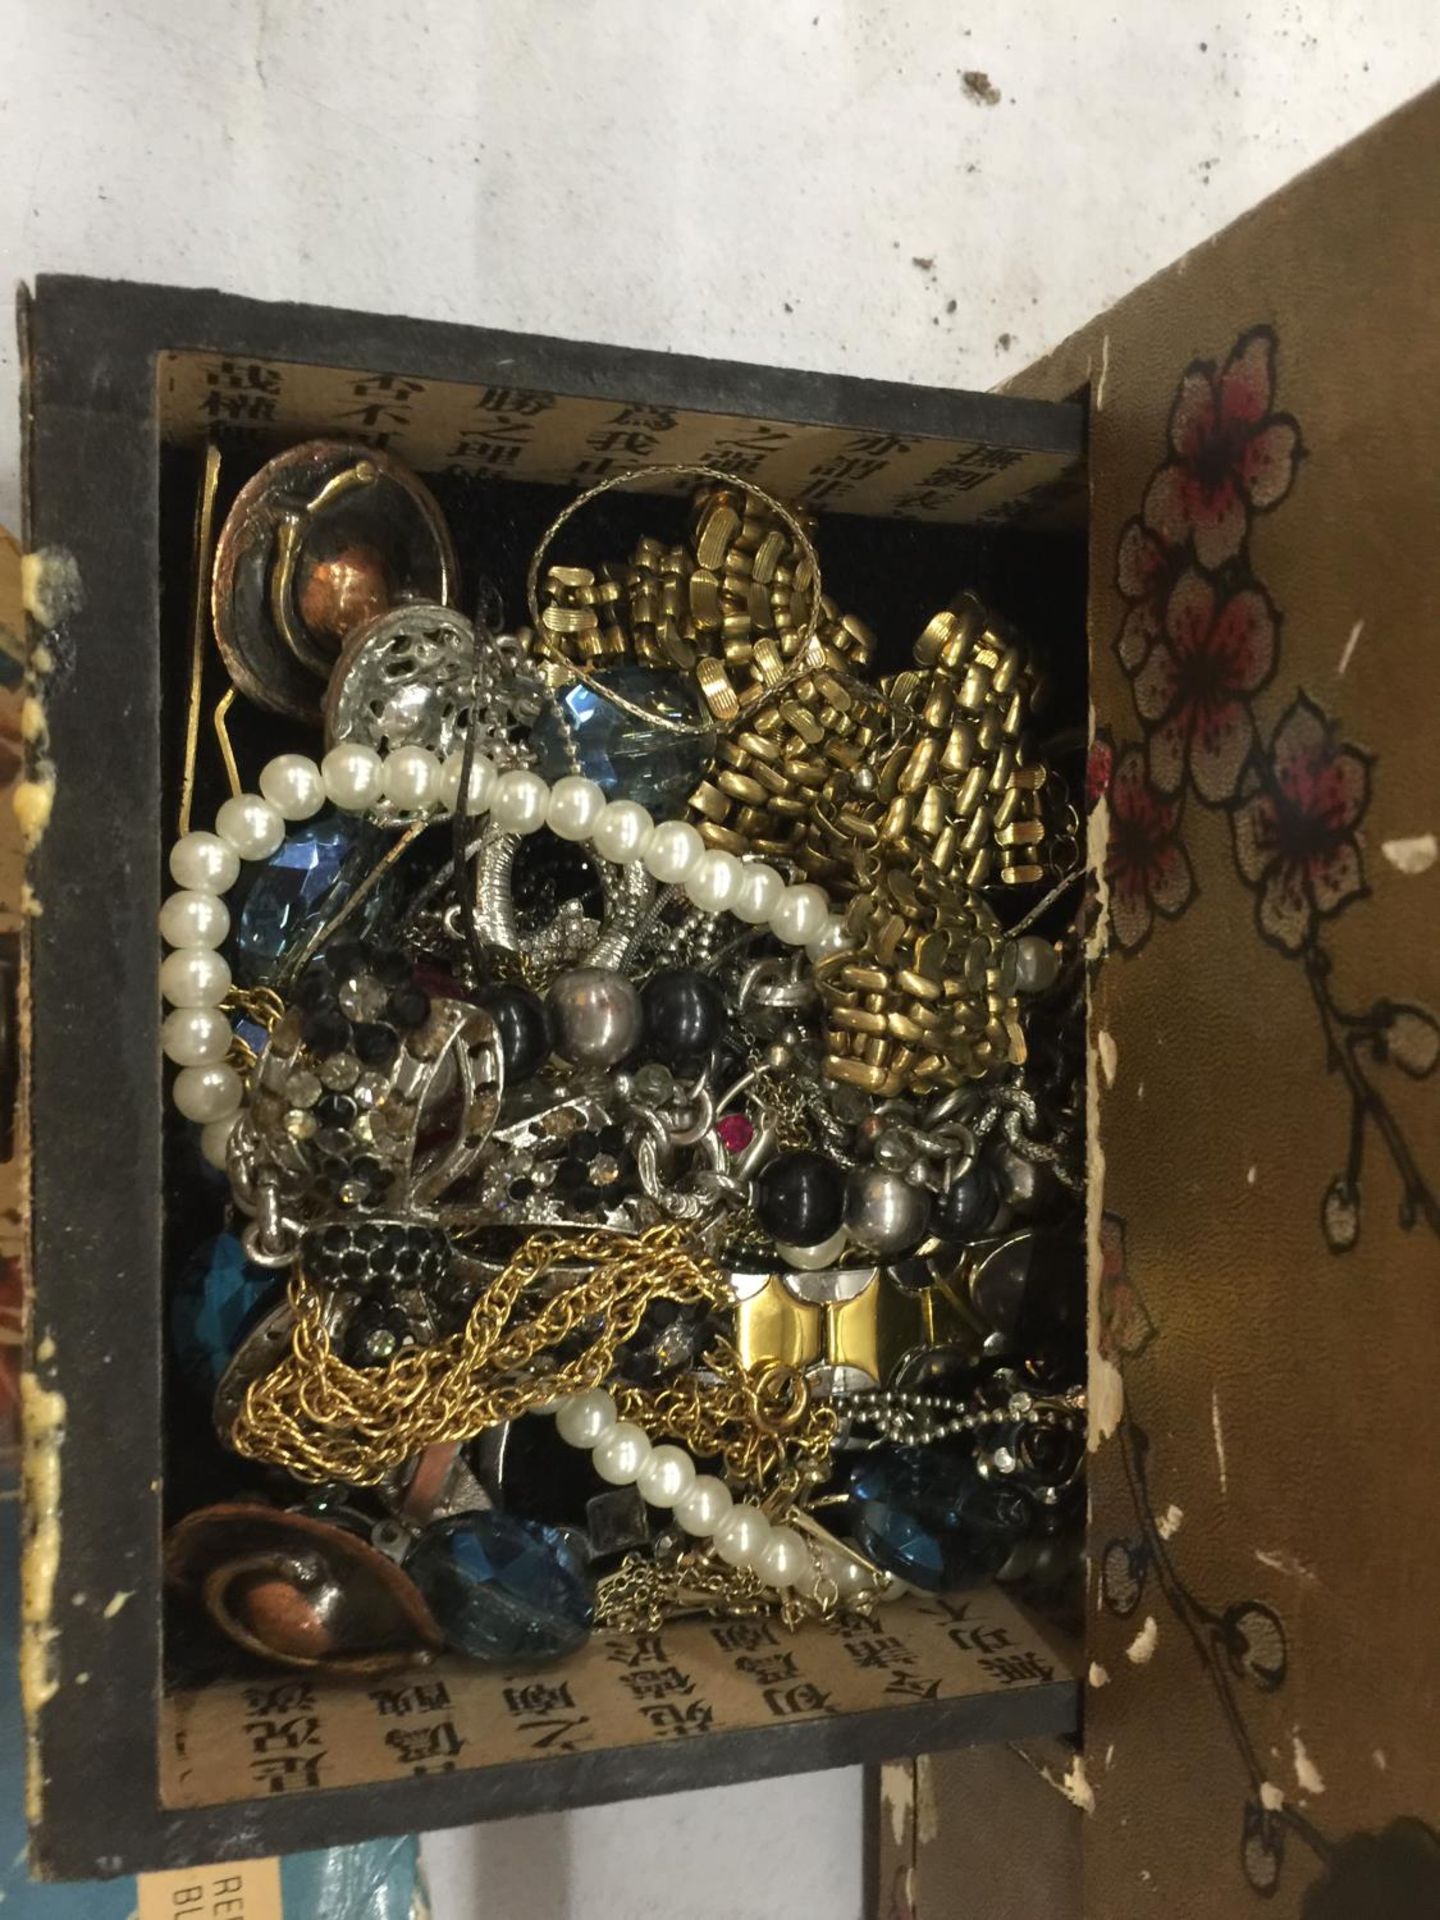 A LARGE QUANTITY OF COSTUME JEWELLERY TO INCLUDE RINGS, EARRINGS, NECKLACES, PENDANTS, ETC - Image 4 of 5